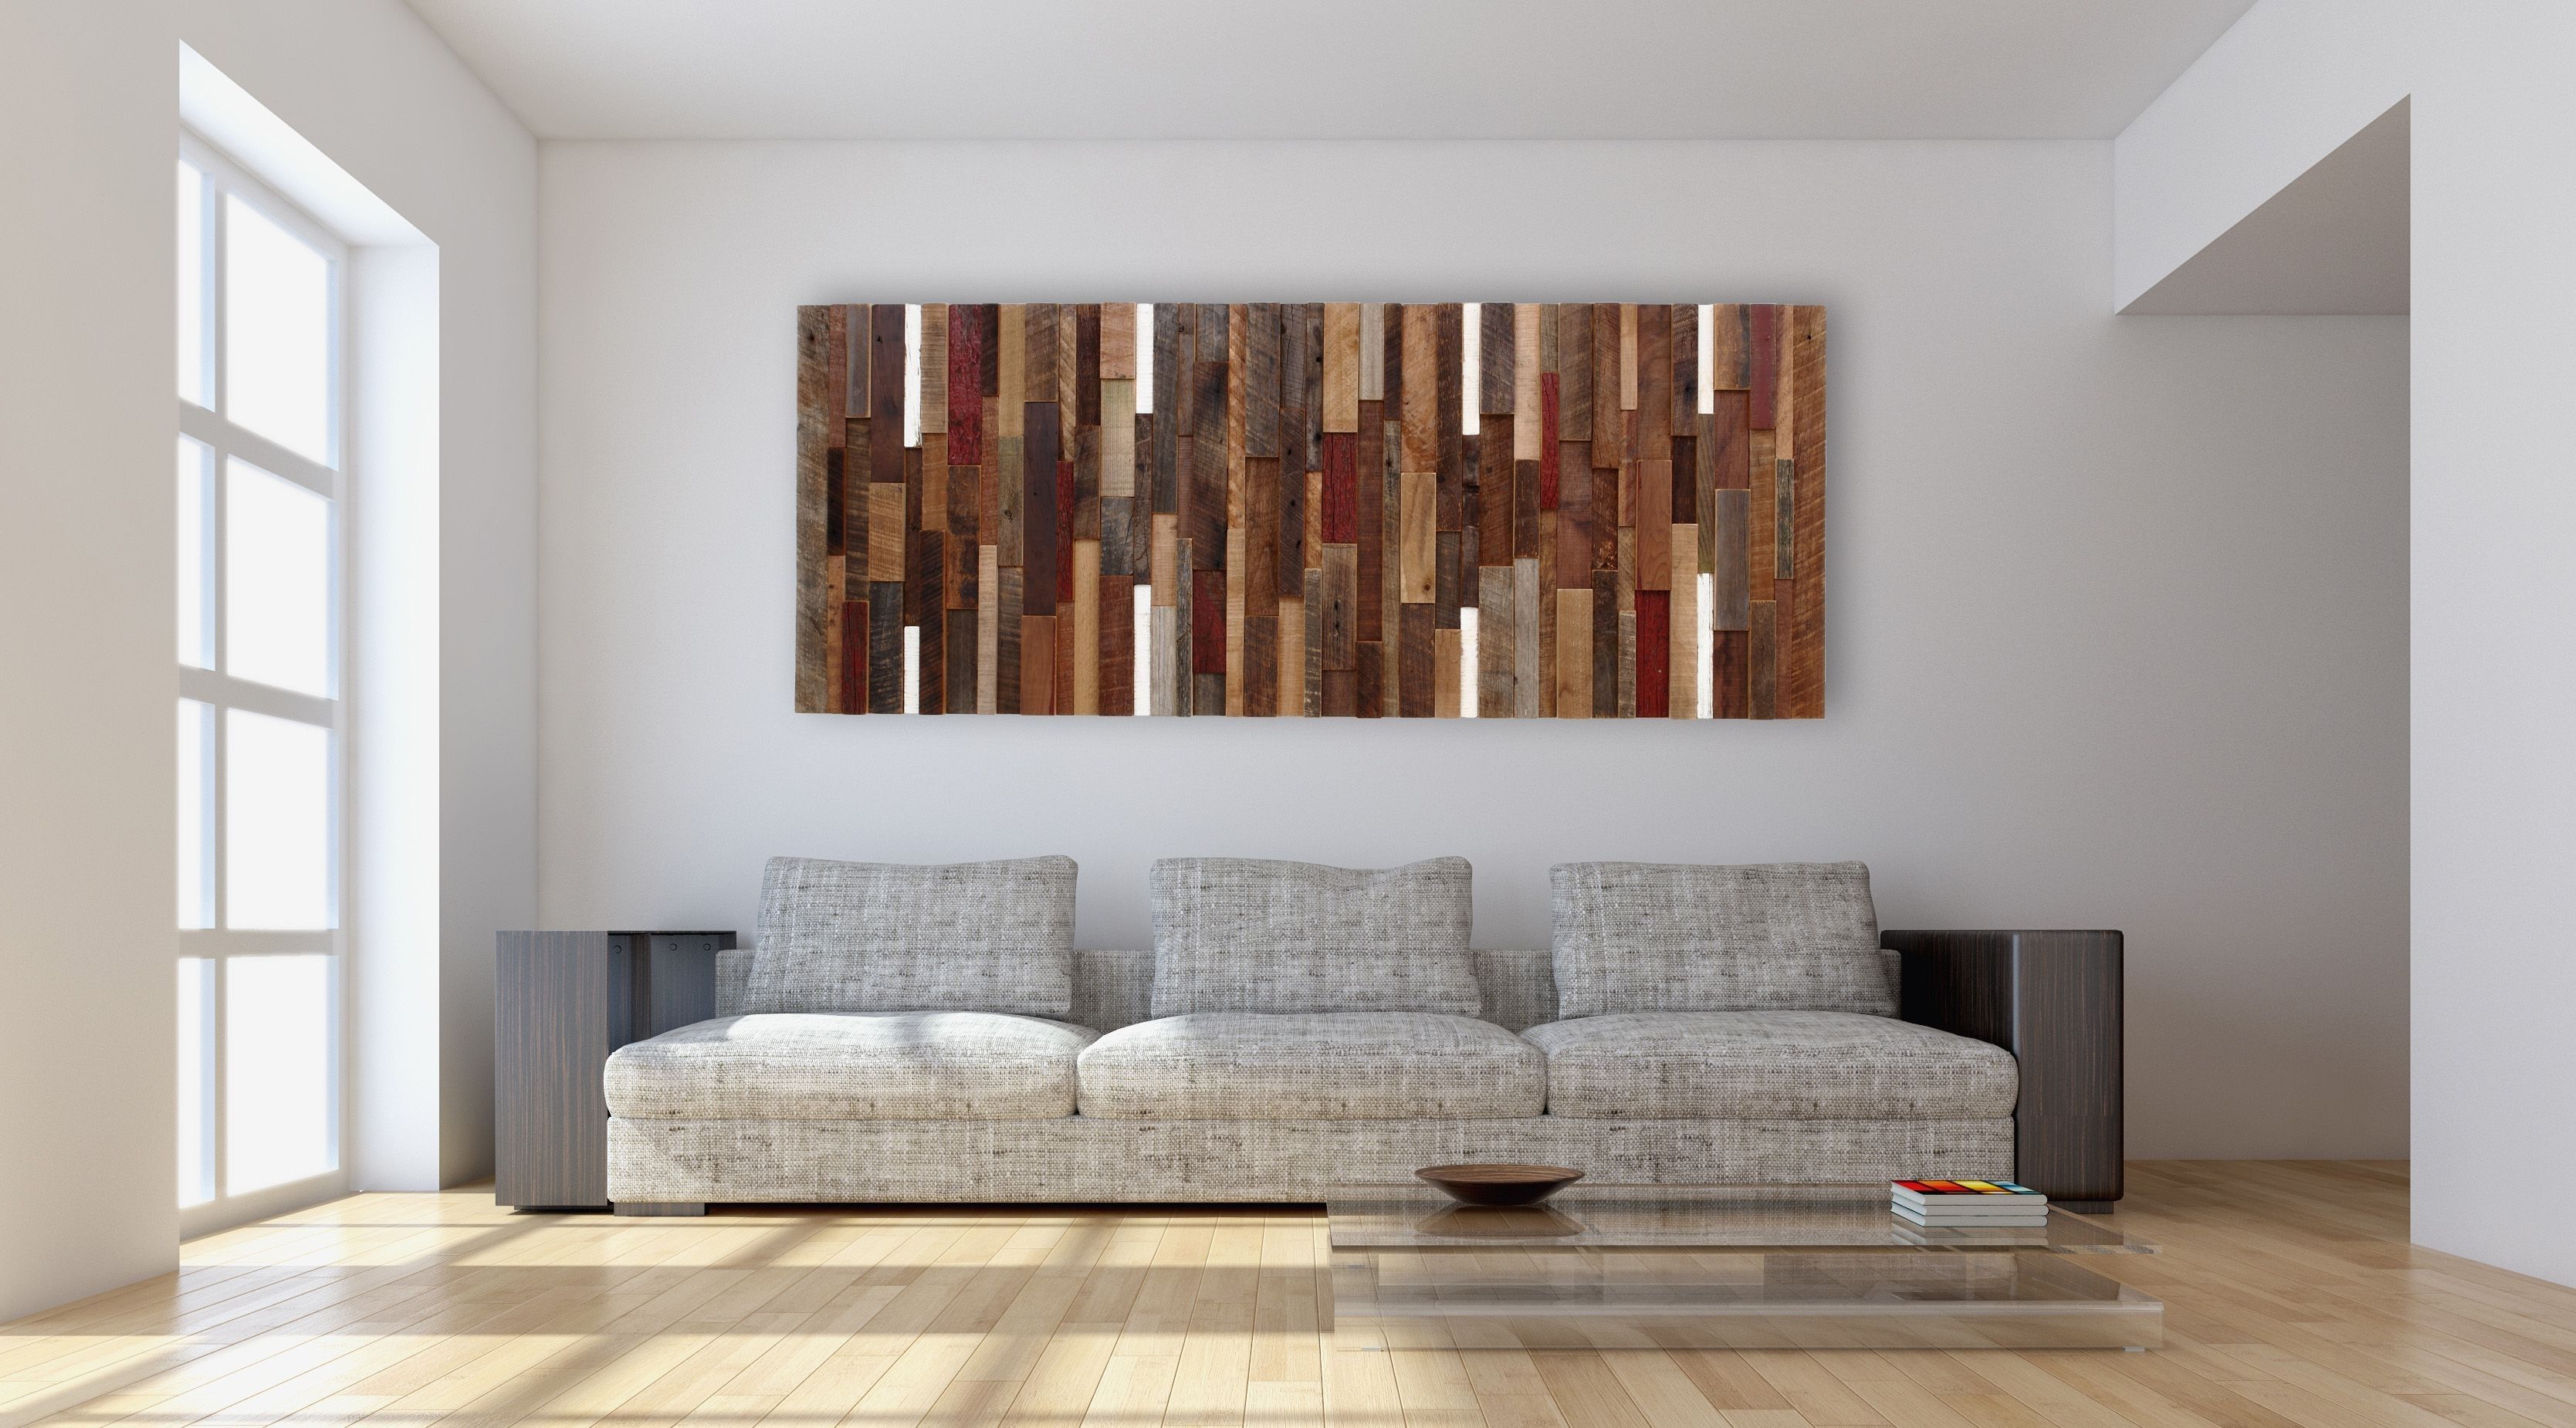 Hand Made Reclaimed Wood Wall Art, Made Intirely Of Reclaimed Barn Throughout Reclaimed Wood Wall Art (View 5 of 20)